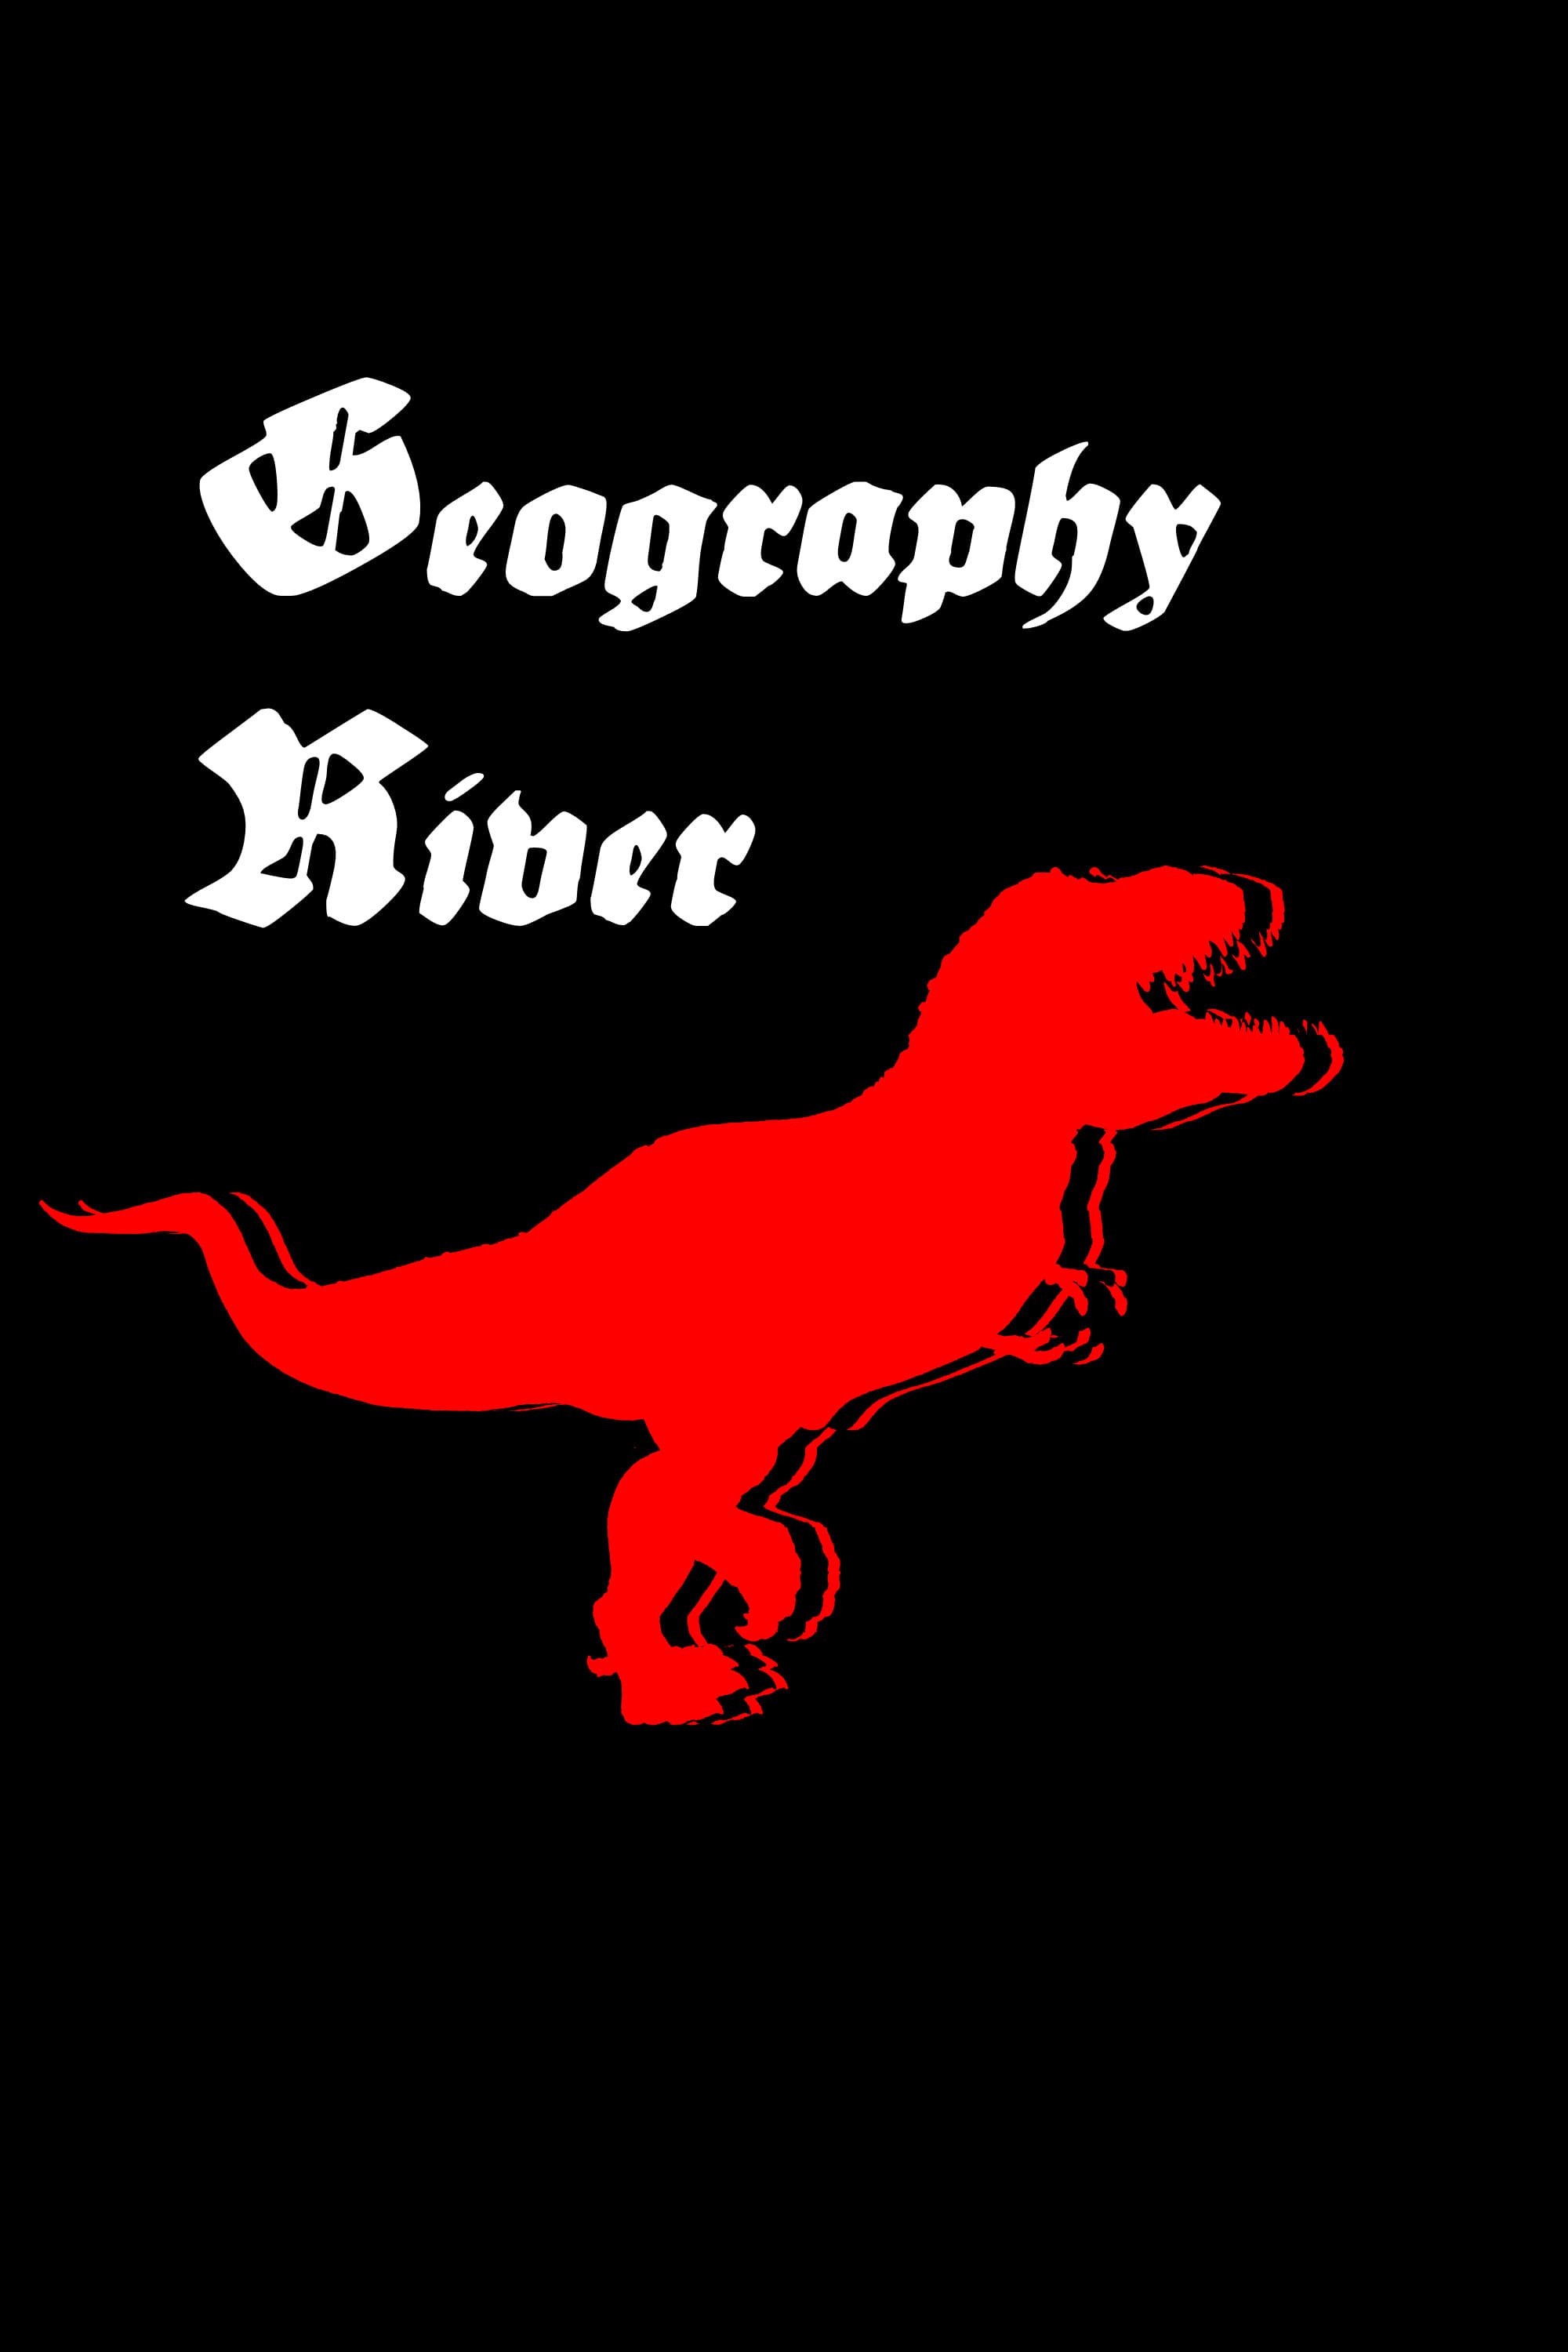 Geography River